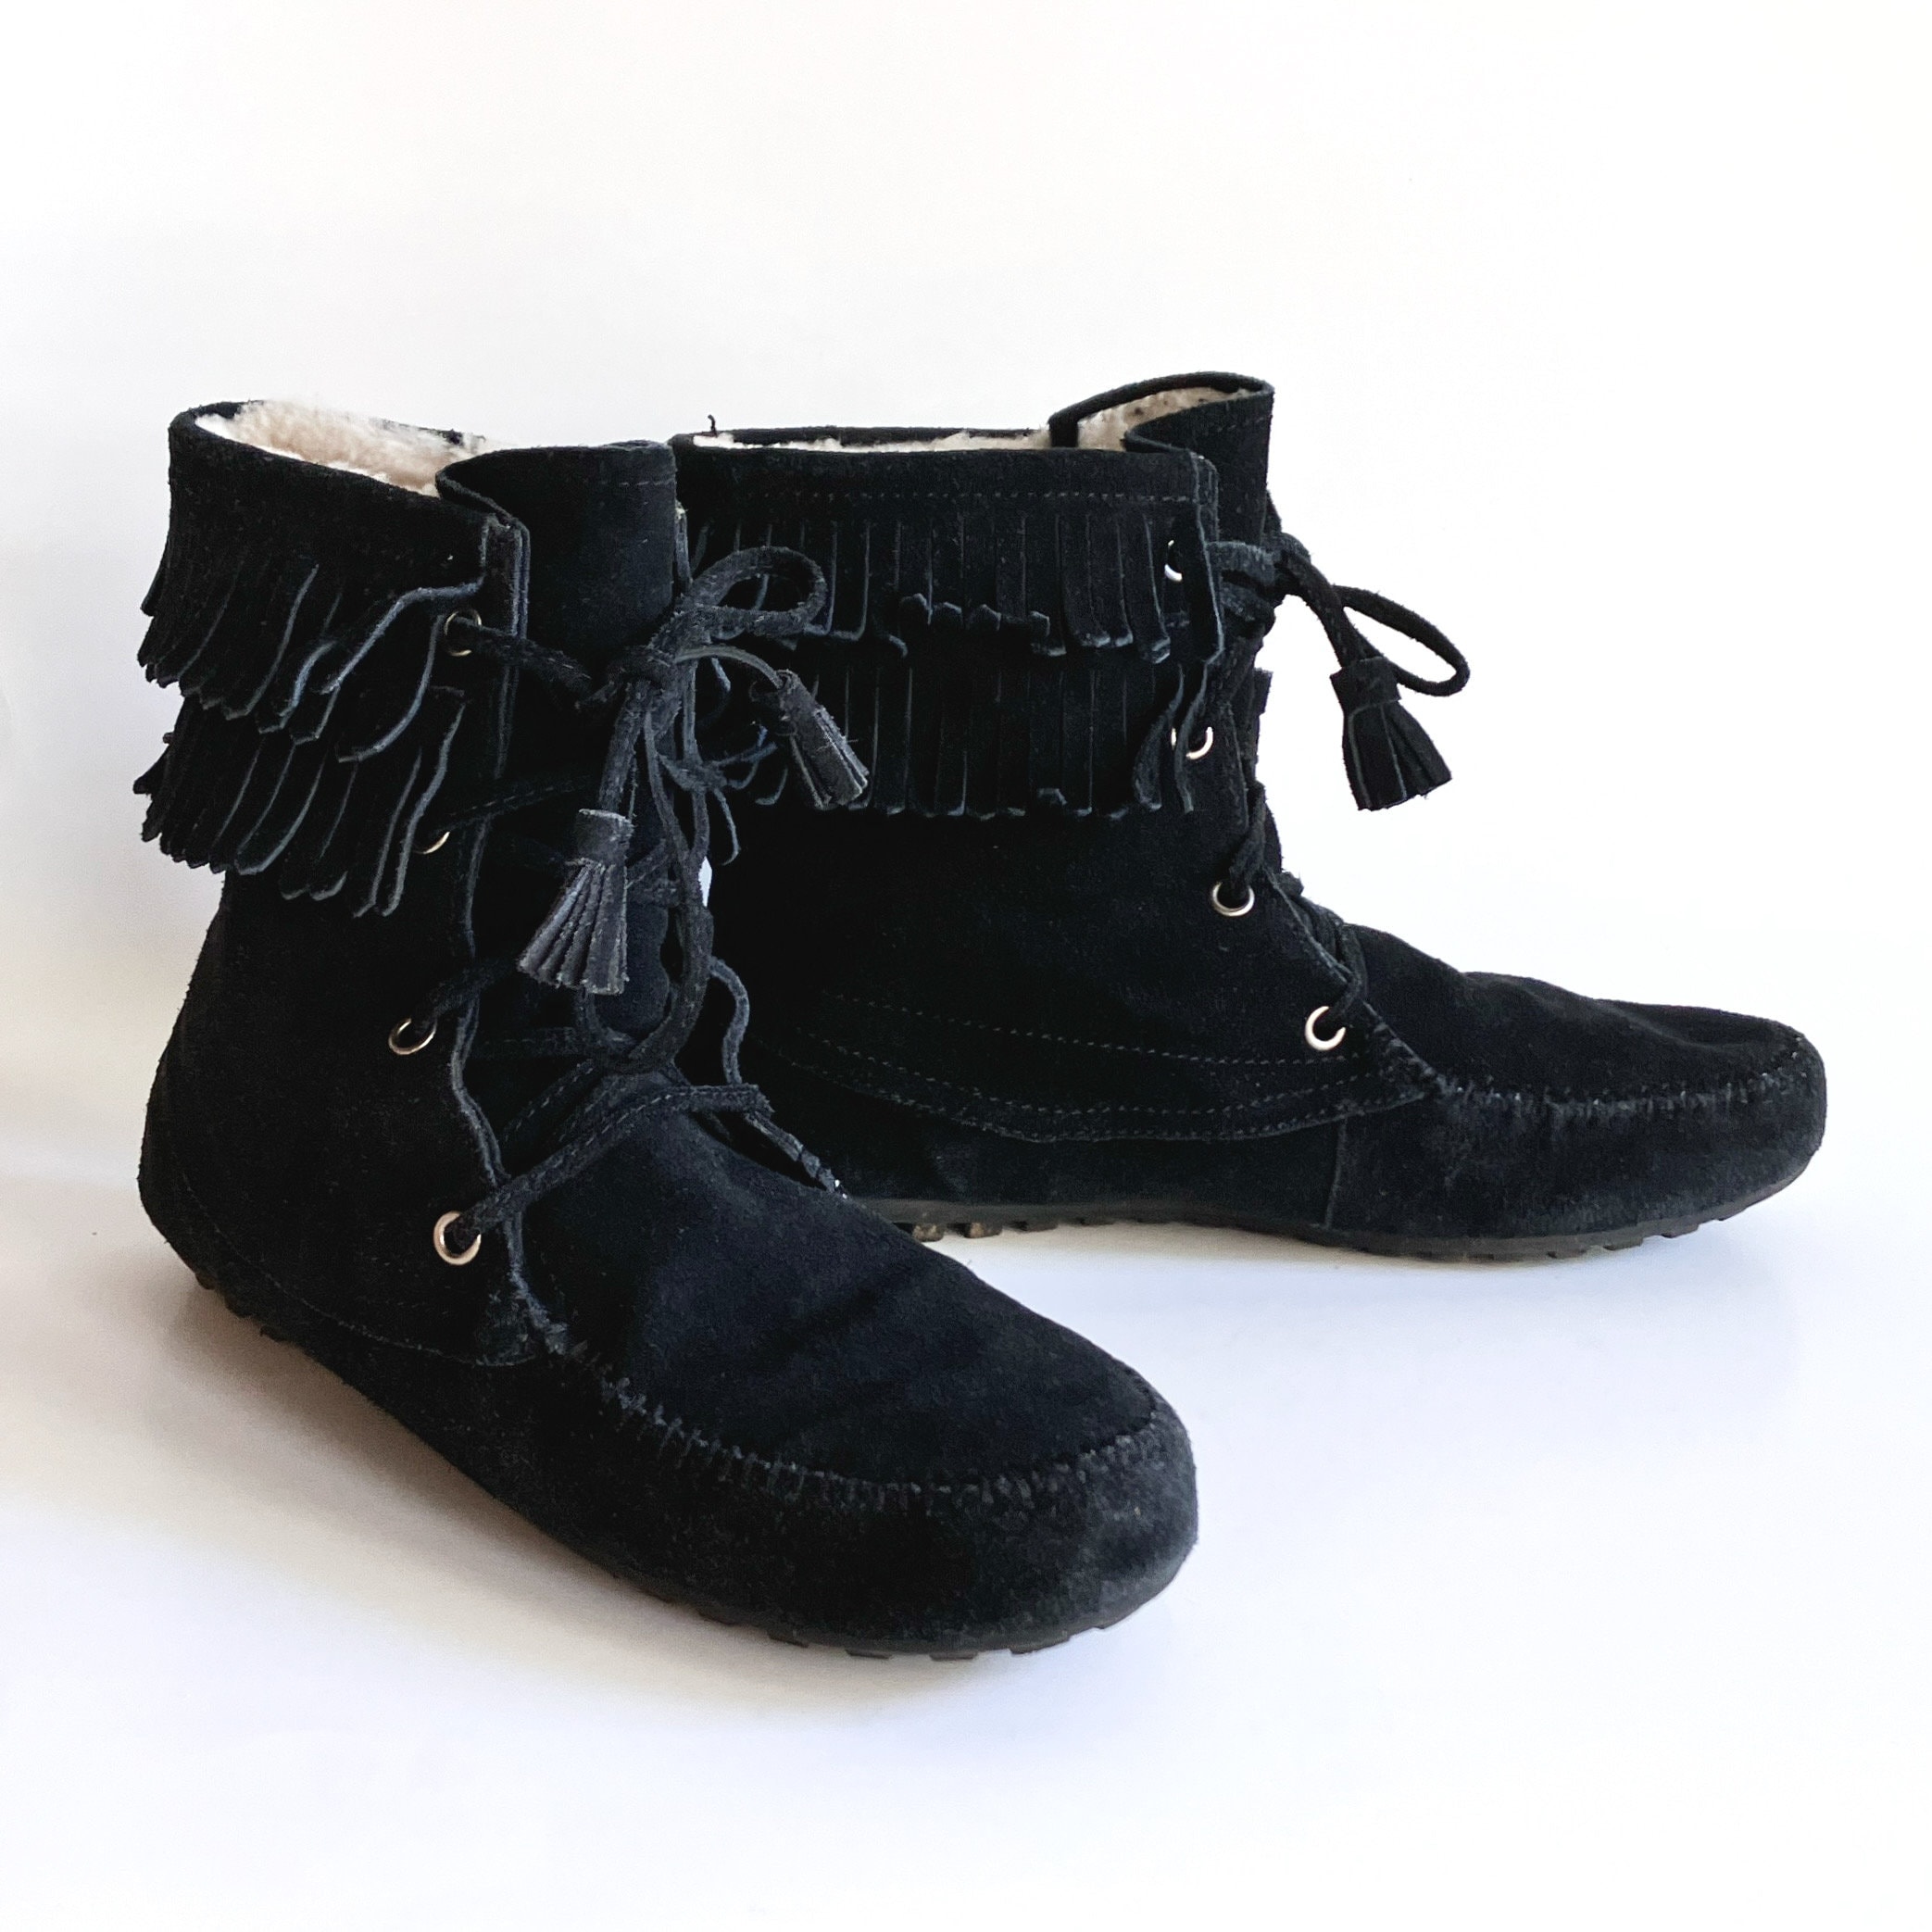 Women's Fleece Lined Snowshoe 12 Tall Lace Up Moccasin Boots